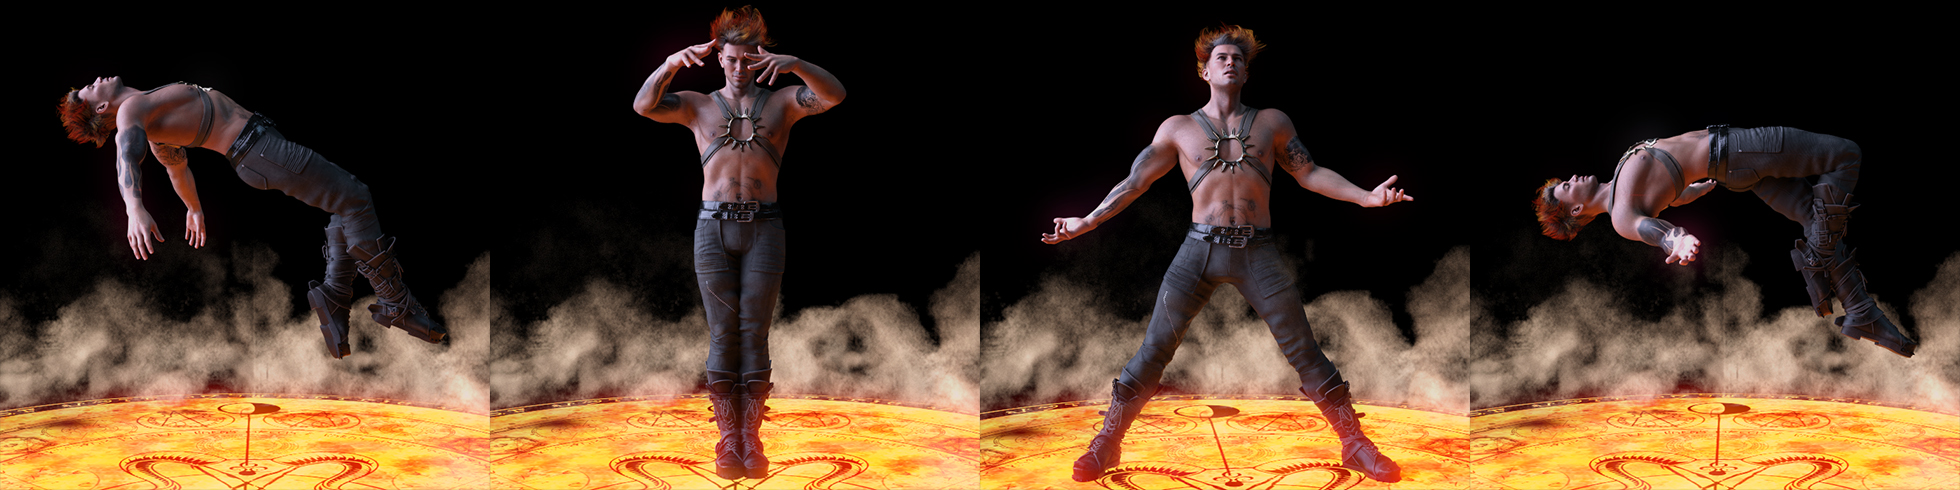 Surge: Necromancer Props and Poses for Genesis 8 and 8.1 by: Skyewolf, 3D Models by Daz 3D